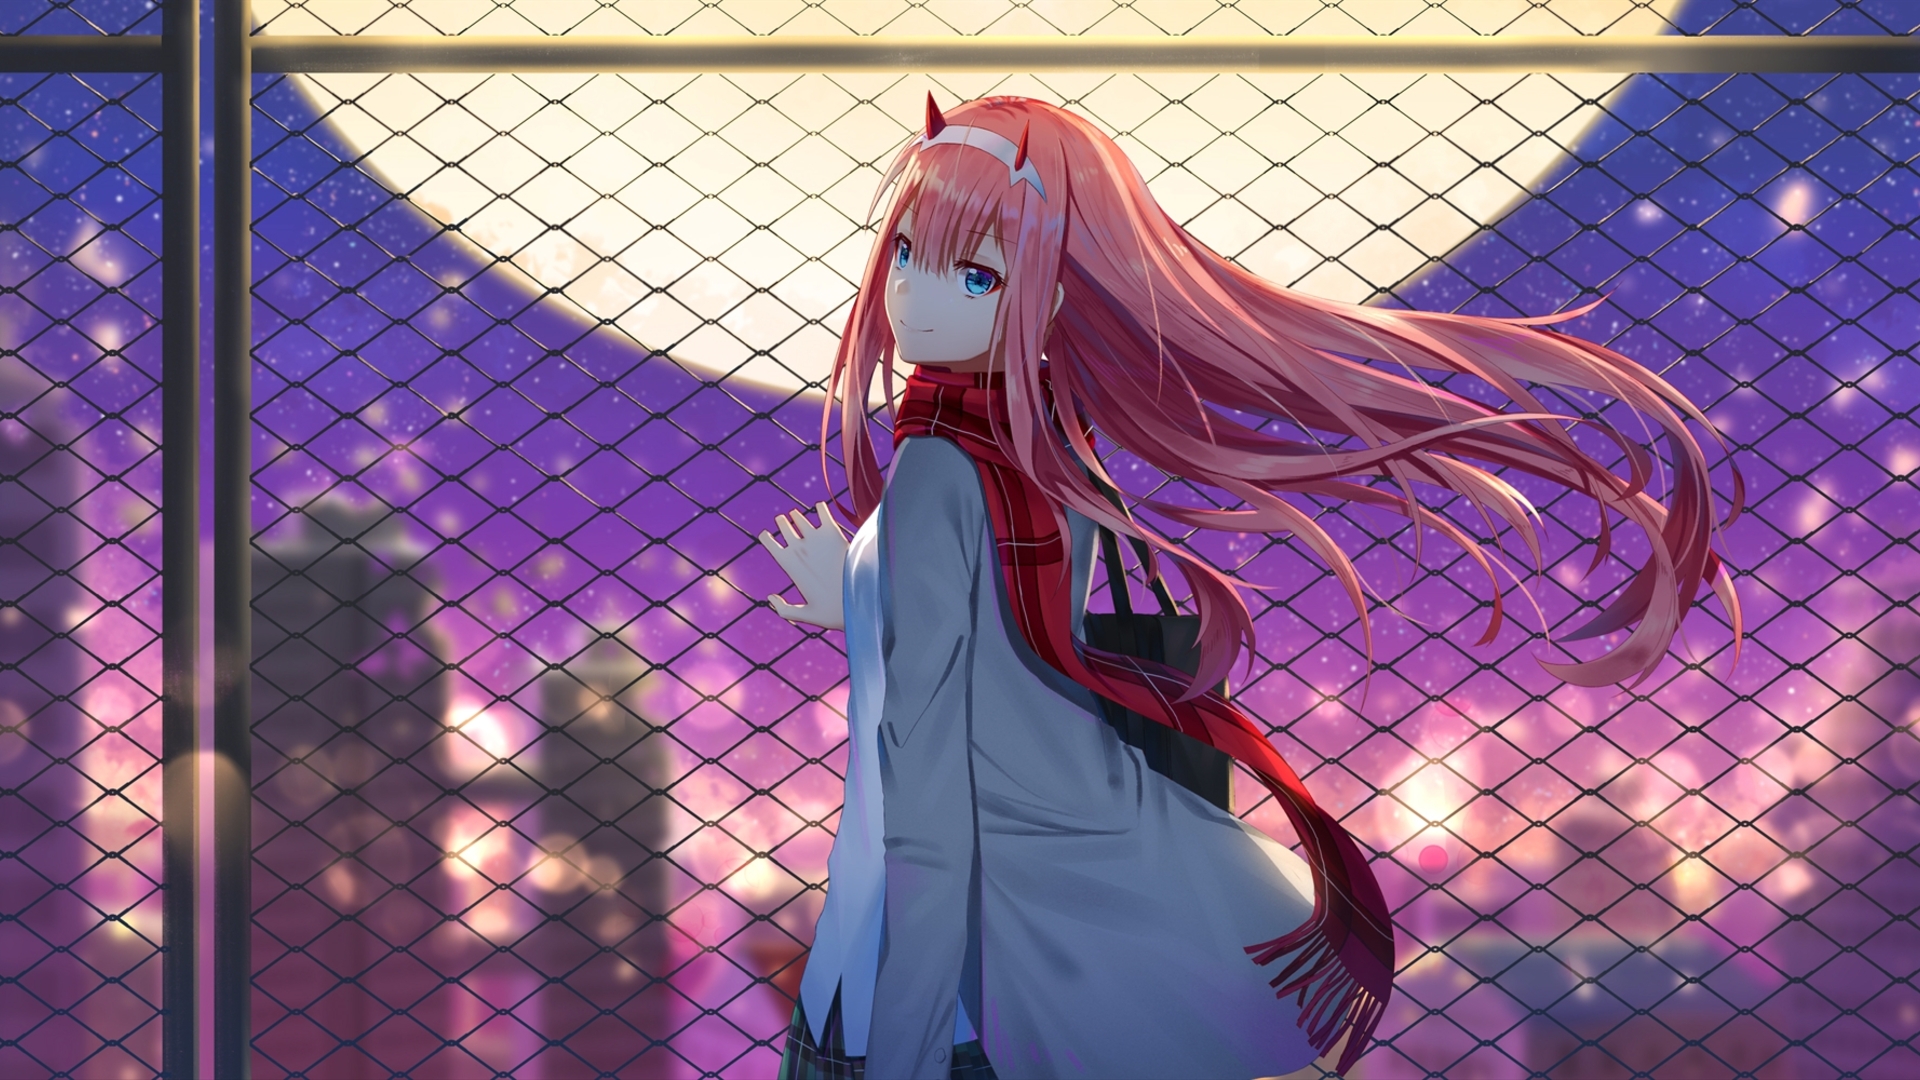 1920x1080 Zero Two Darling In The Franxx Laptop Full Hd 1080p Hd 4k Wallpapers Images Backgrounds Photos And Pictures